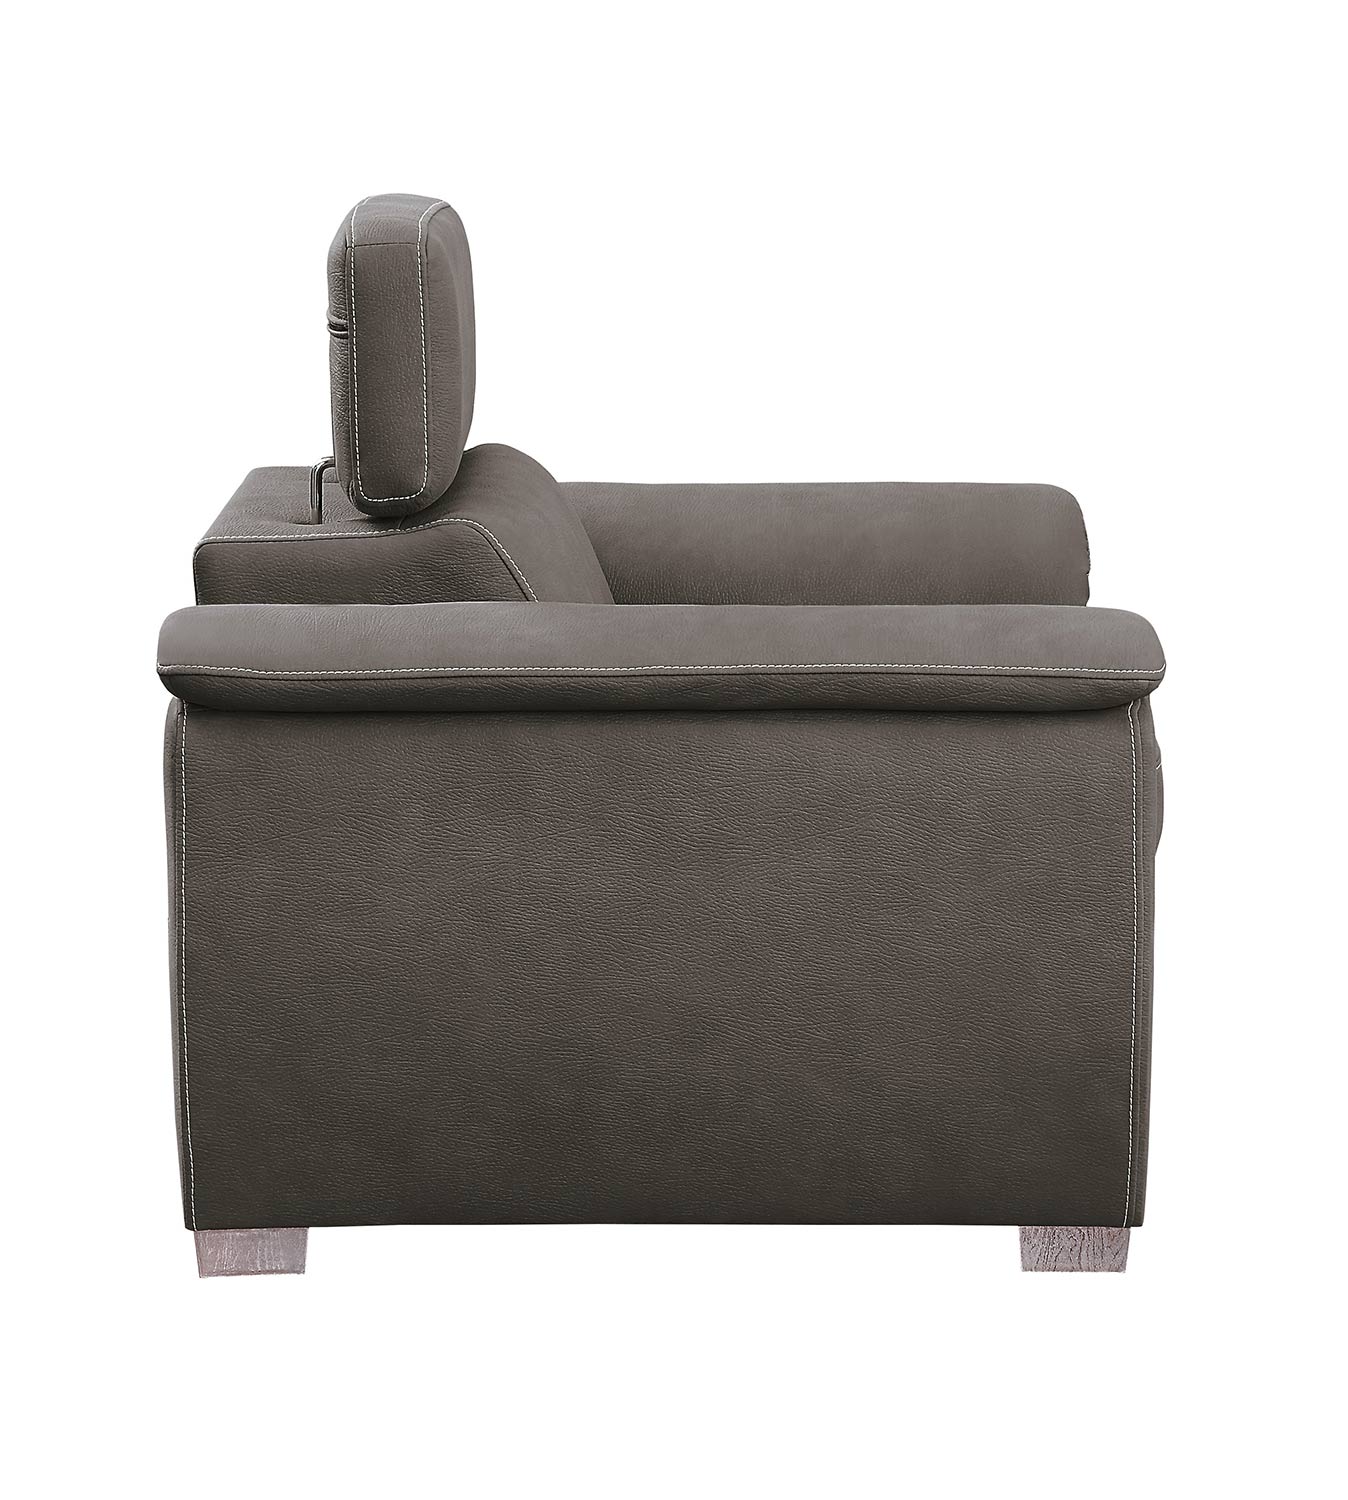 Homelegance Ferriday Chair with Pull-out Ottoman - Taupe